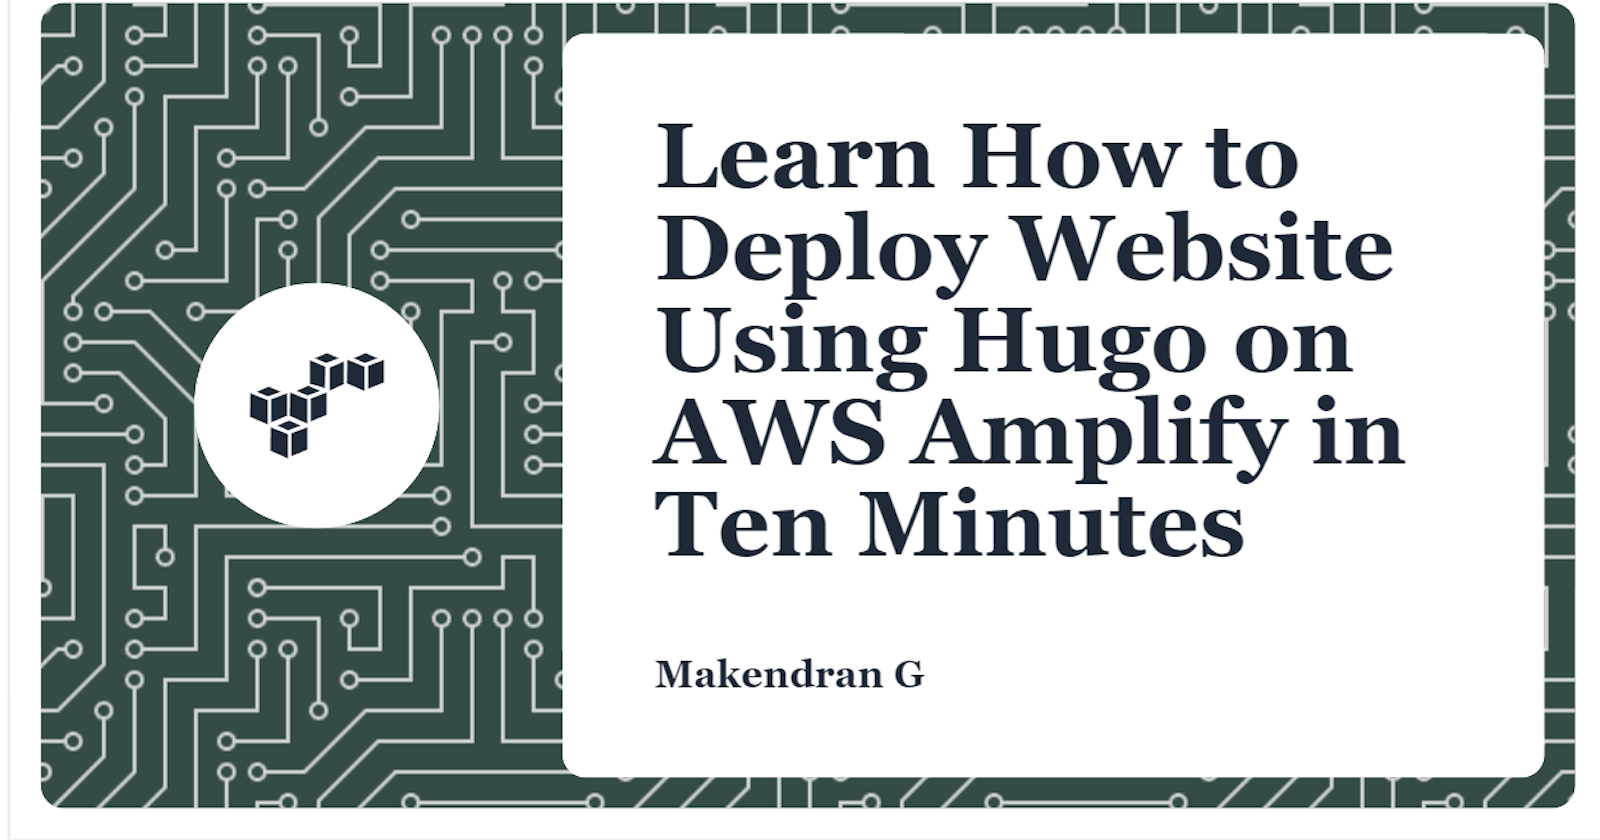 Learn How to Deploy Website Using Hugo on AWS Amplify in Ten Minutes